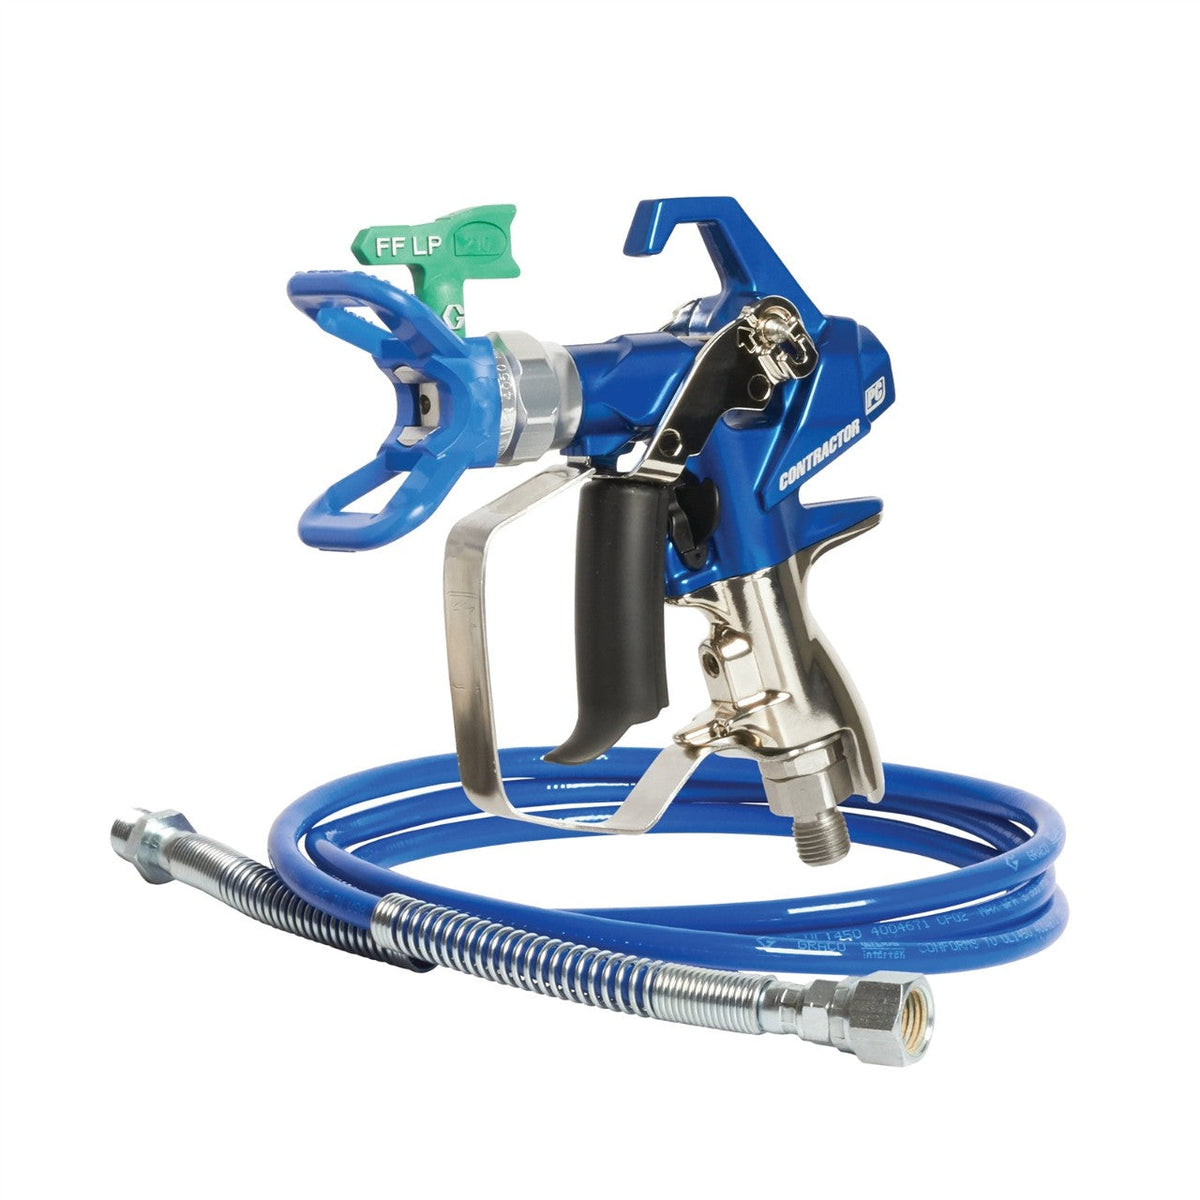 Graco Contractor PC Compact Gun, 1/8 in x 4.5 ft Whip Hose, RAC X FFLP 210 SwitchTip - The Paint People